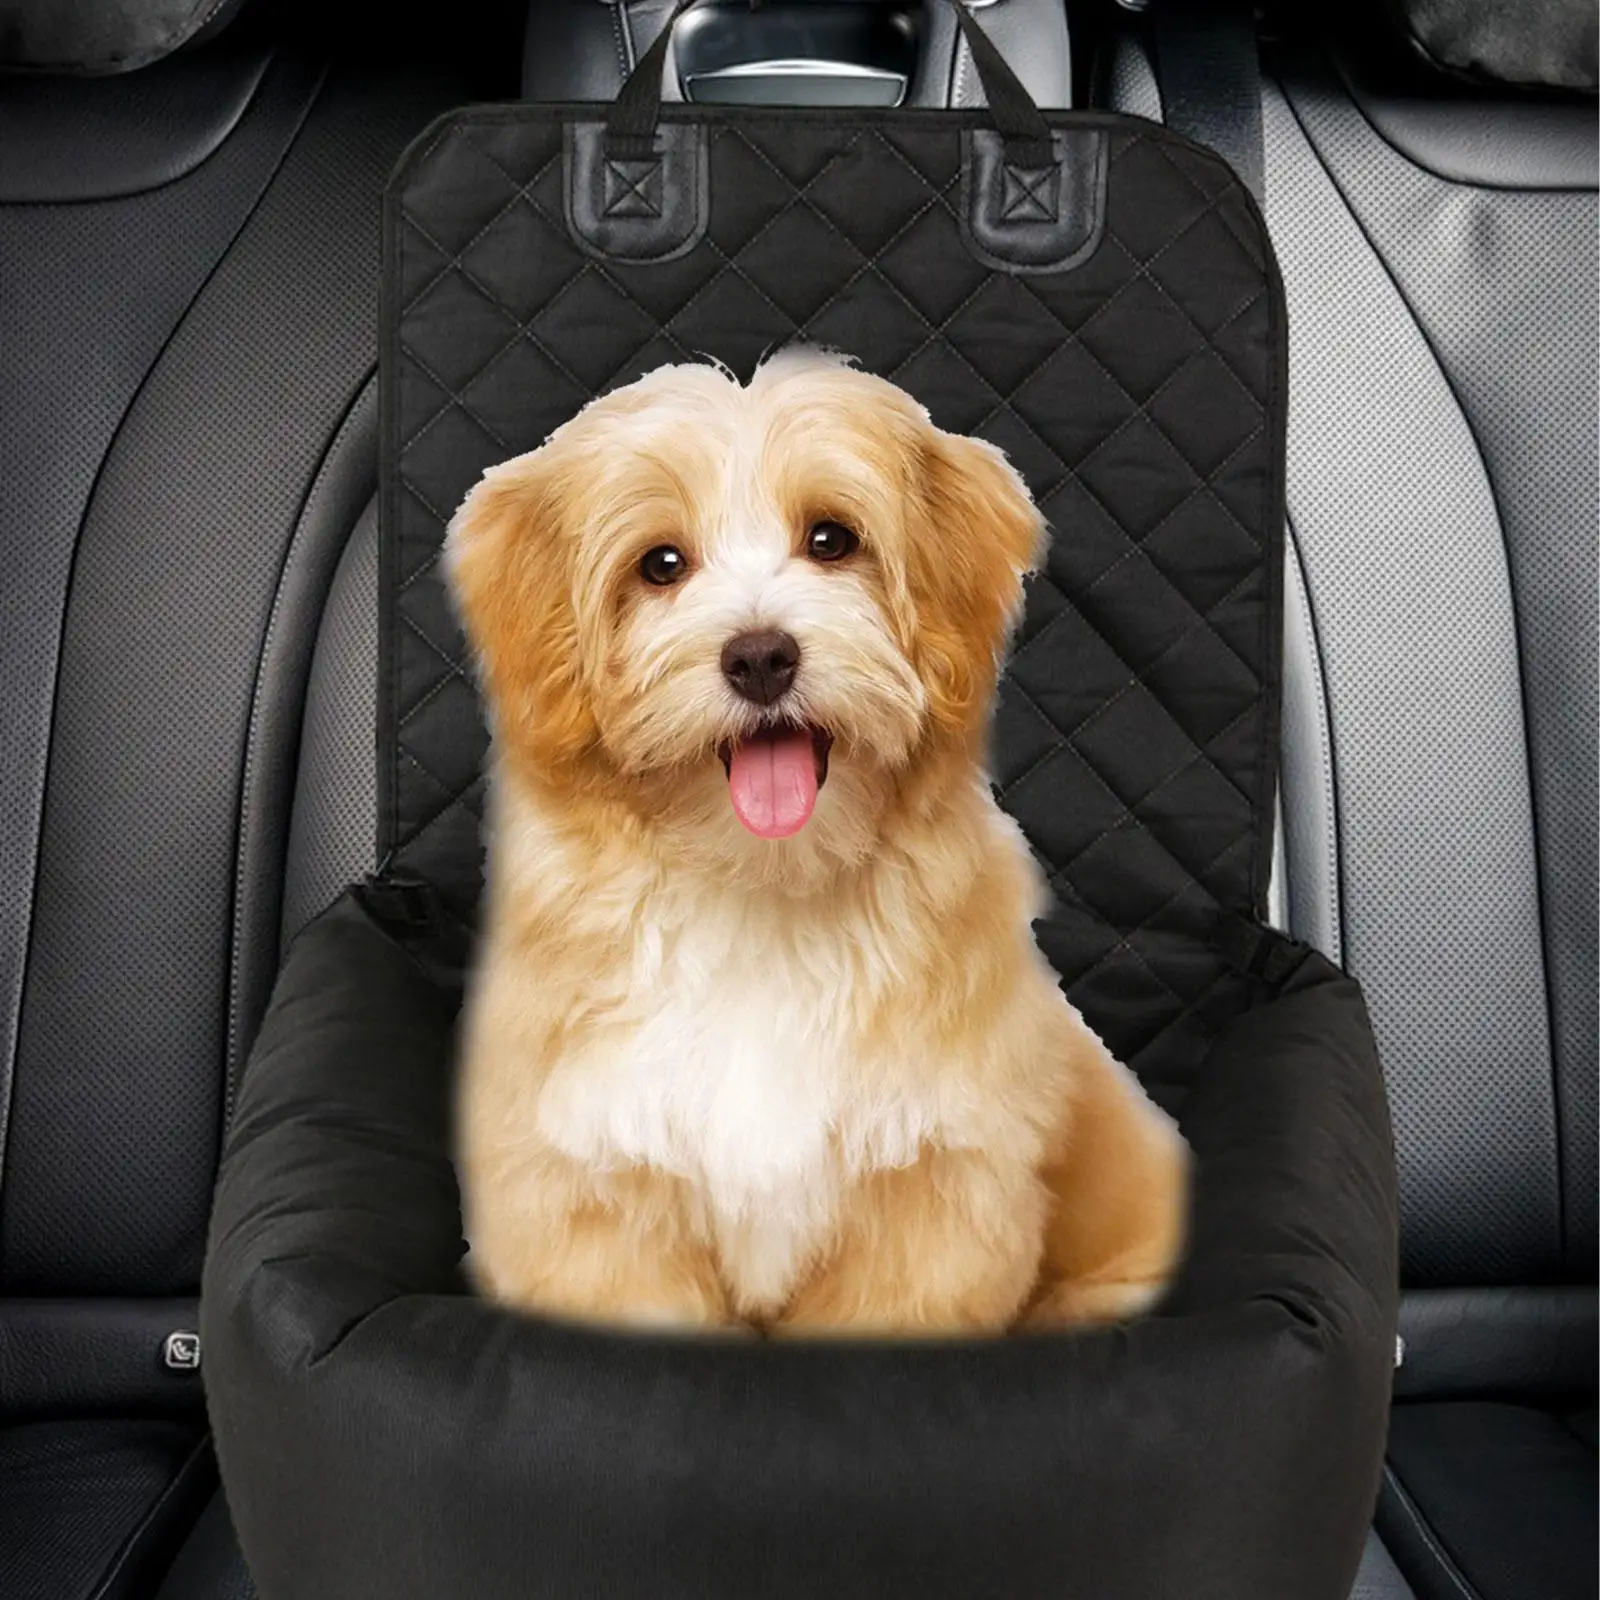 Dog Car Seat Bed Portable Seat Center Console Dog Seat Stable Lightweight Pet Supplies Travel Carrier Bed Car Armrest Dog Seat